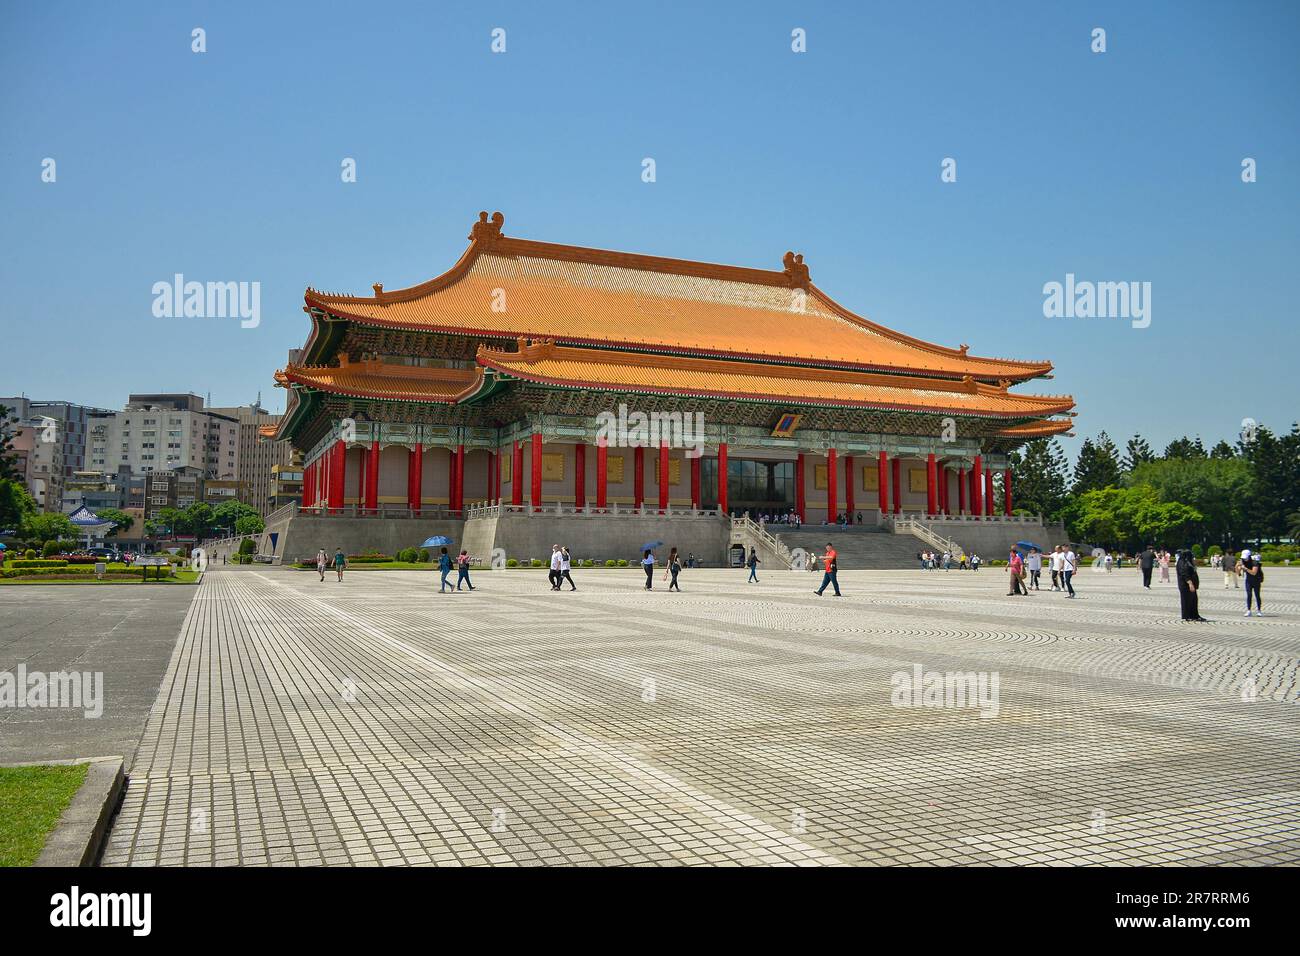 National Concert Hall at Liberty Square in the area of Chiang Kai-shek Memorial Hall, a very famous tourist destination in Taipei, Taiwan Stock Photo